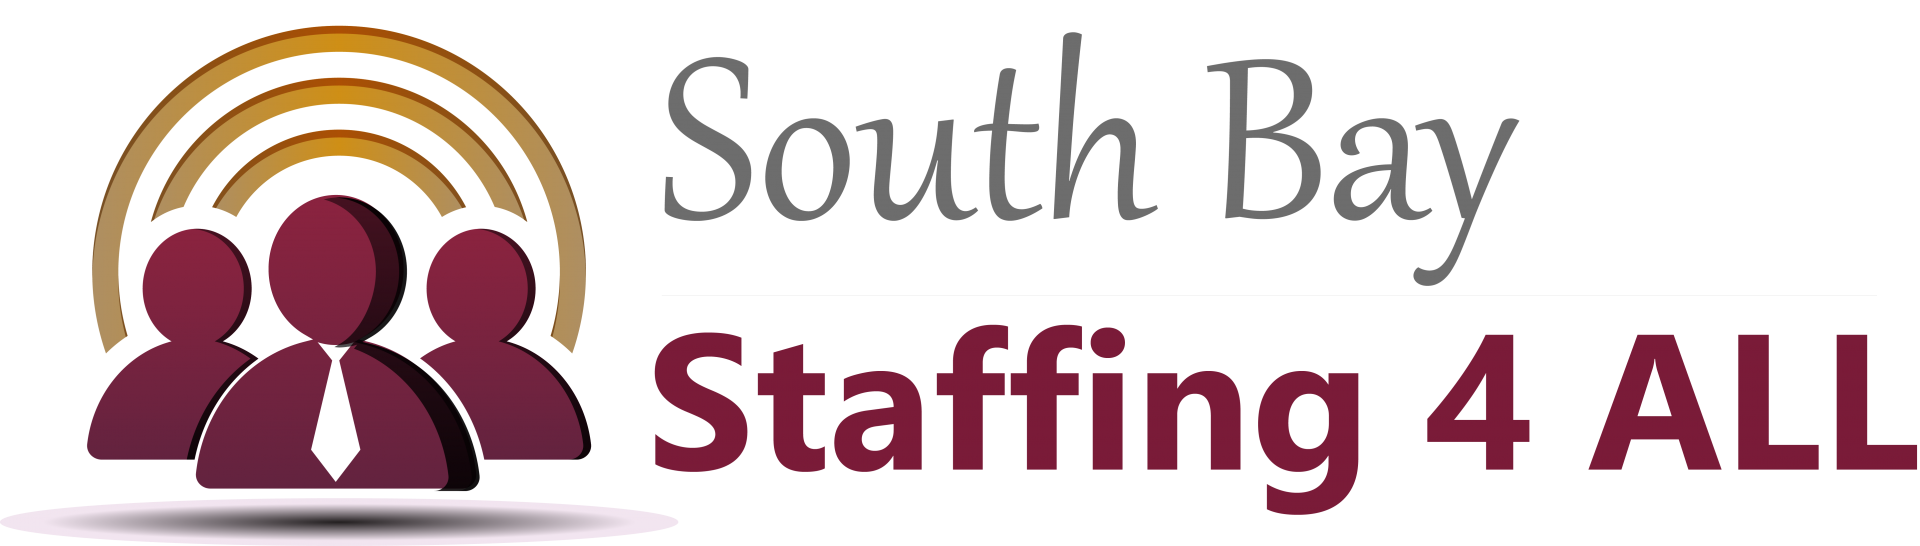 Temporary staffing for hire in the south bay area